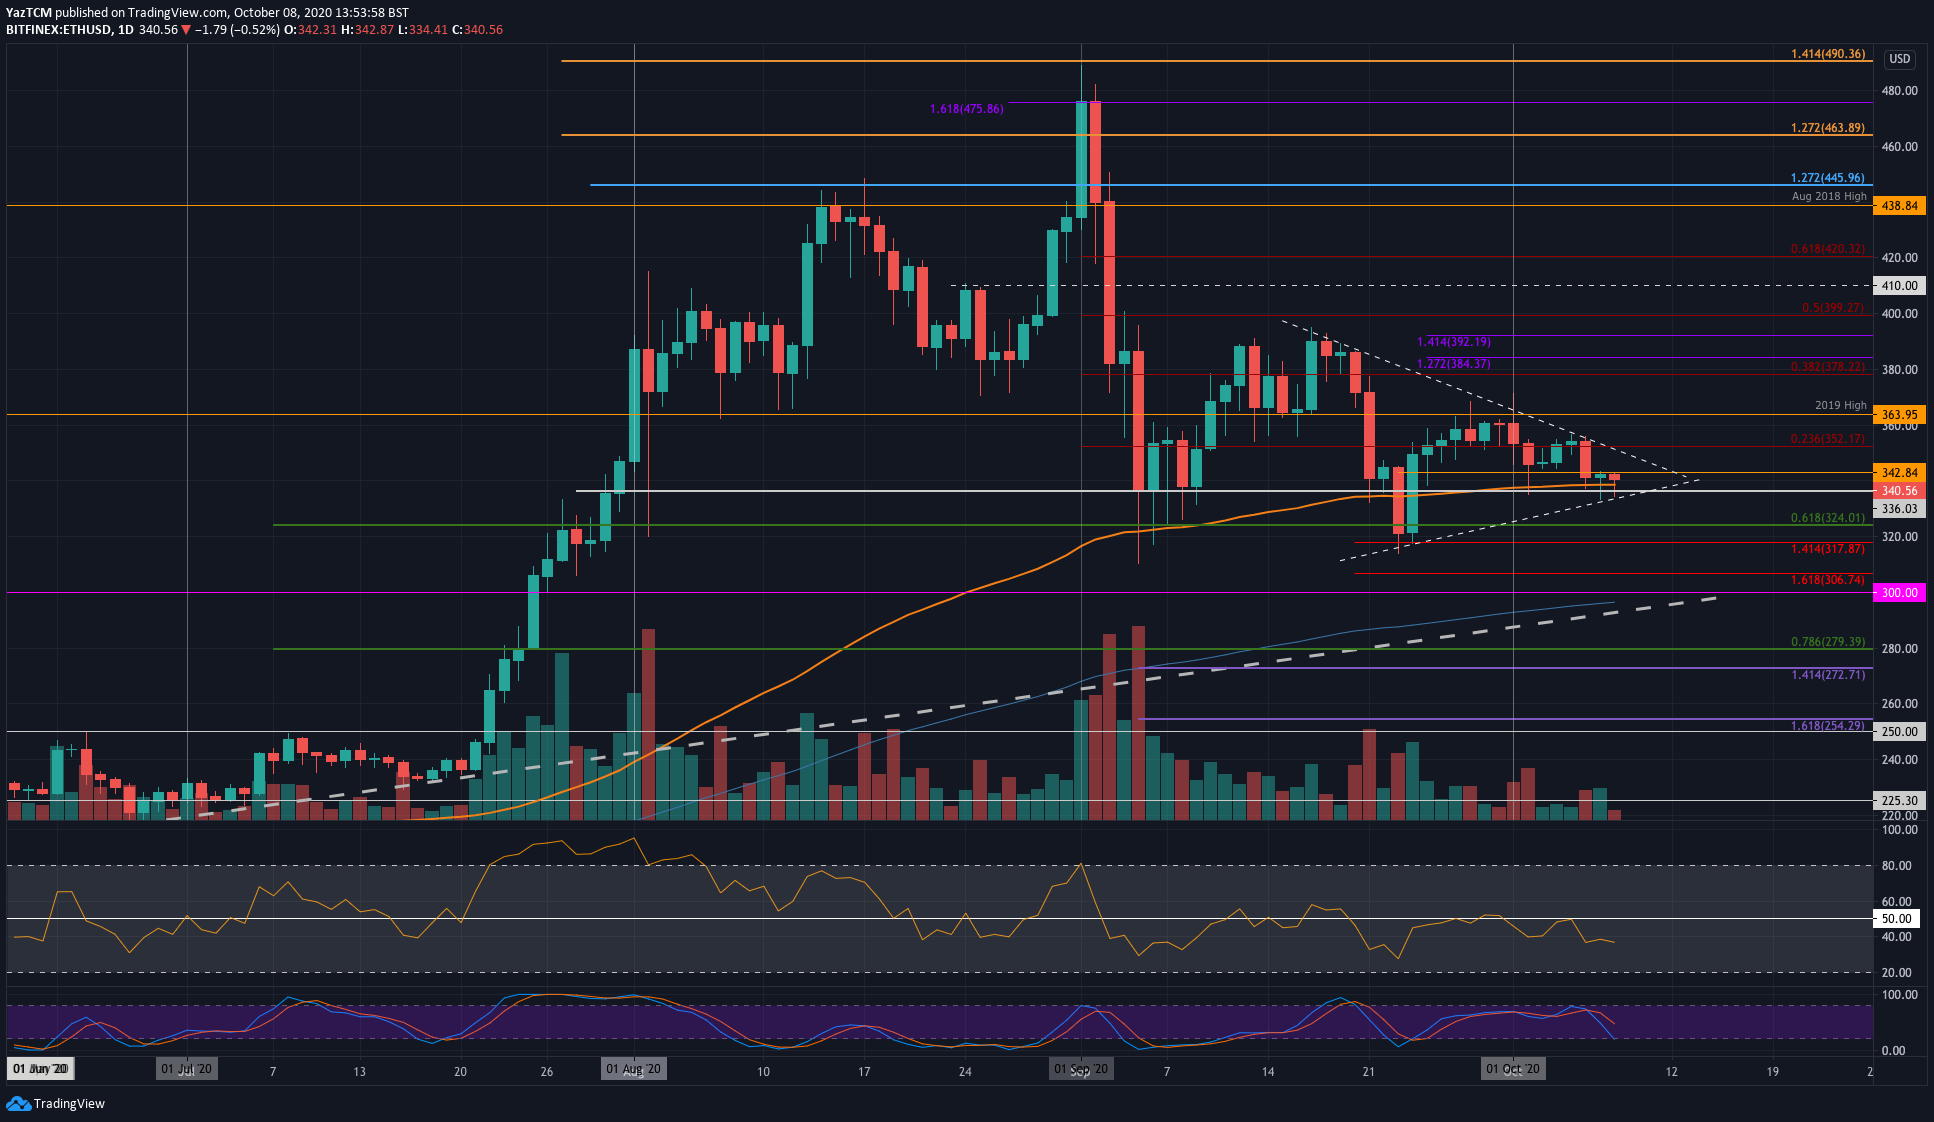 Ethereum Bulls Attempting a Shot at $350, Breakout Incoming? (ETH Price Analysis)